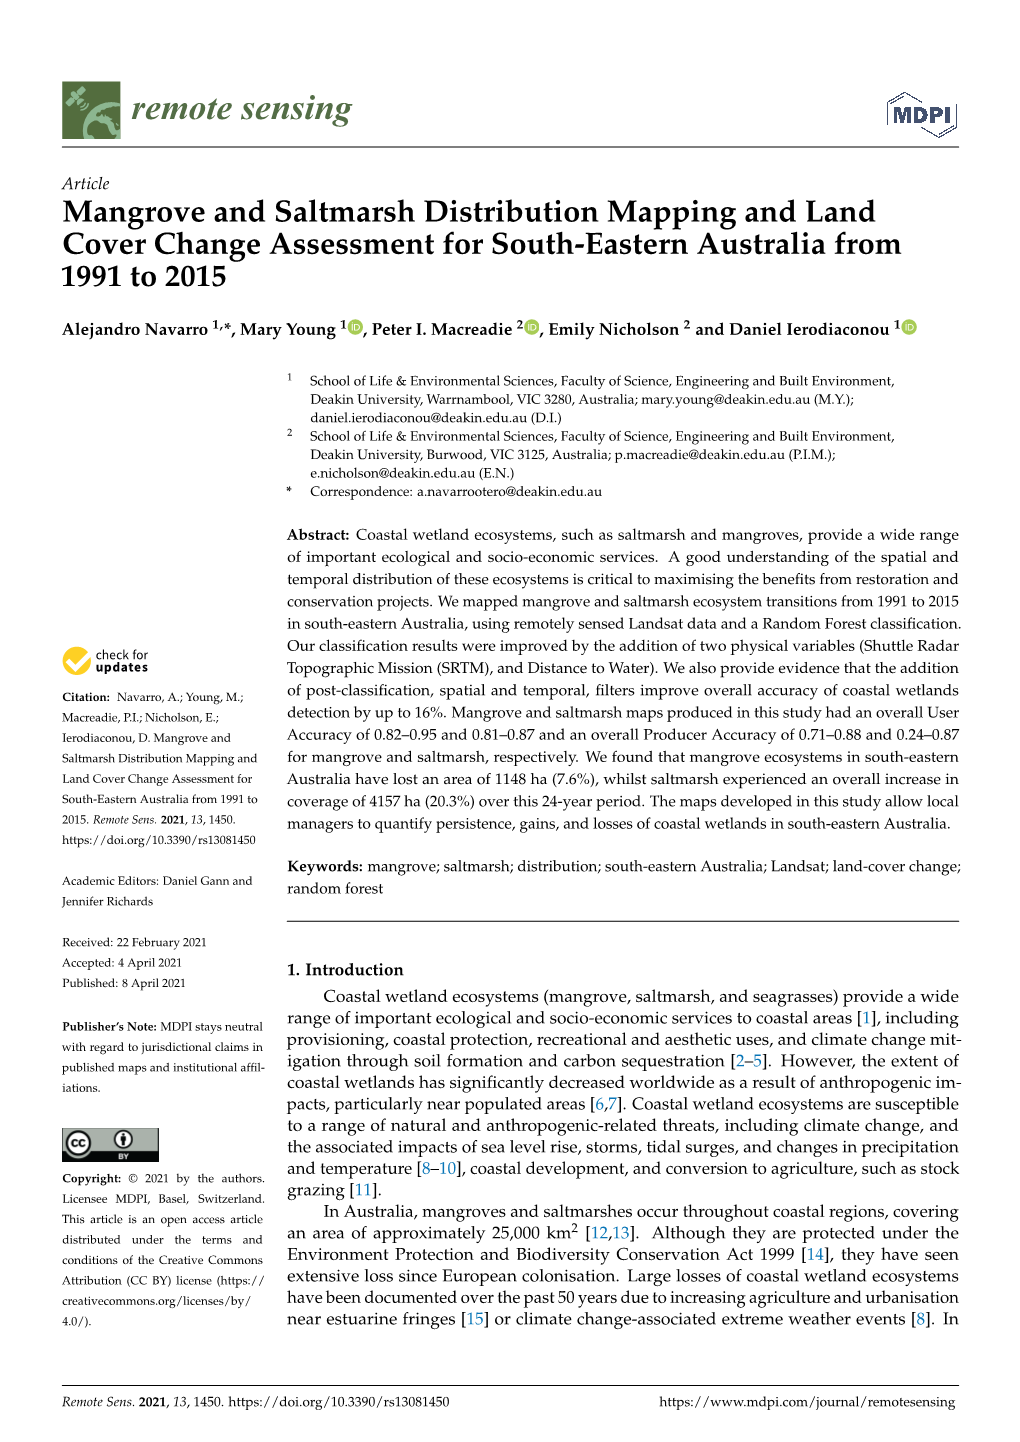 Mangrove and Saltmarsh Distribution Mapping and Land Cover Change Assessment for South-Eastern Australia from 1991 to 2015